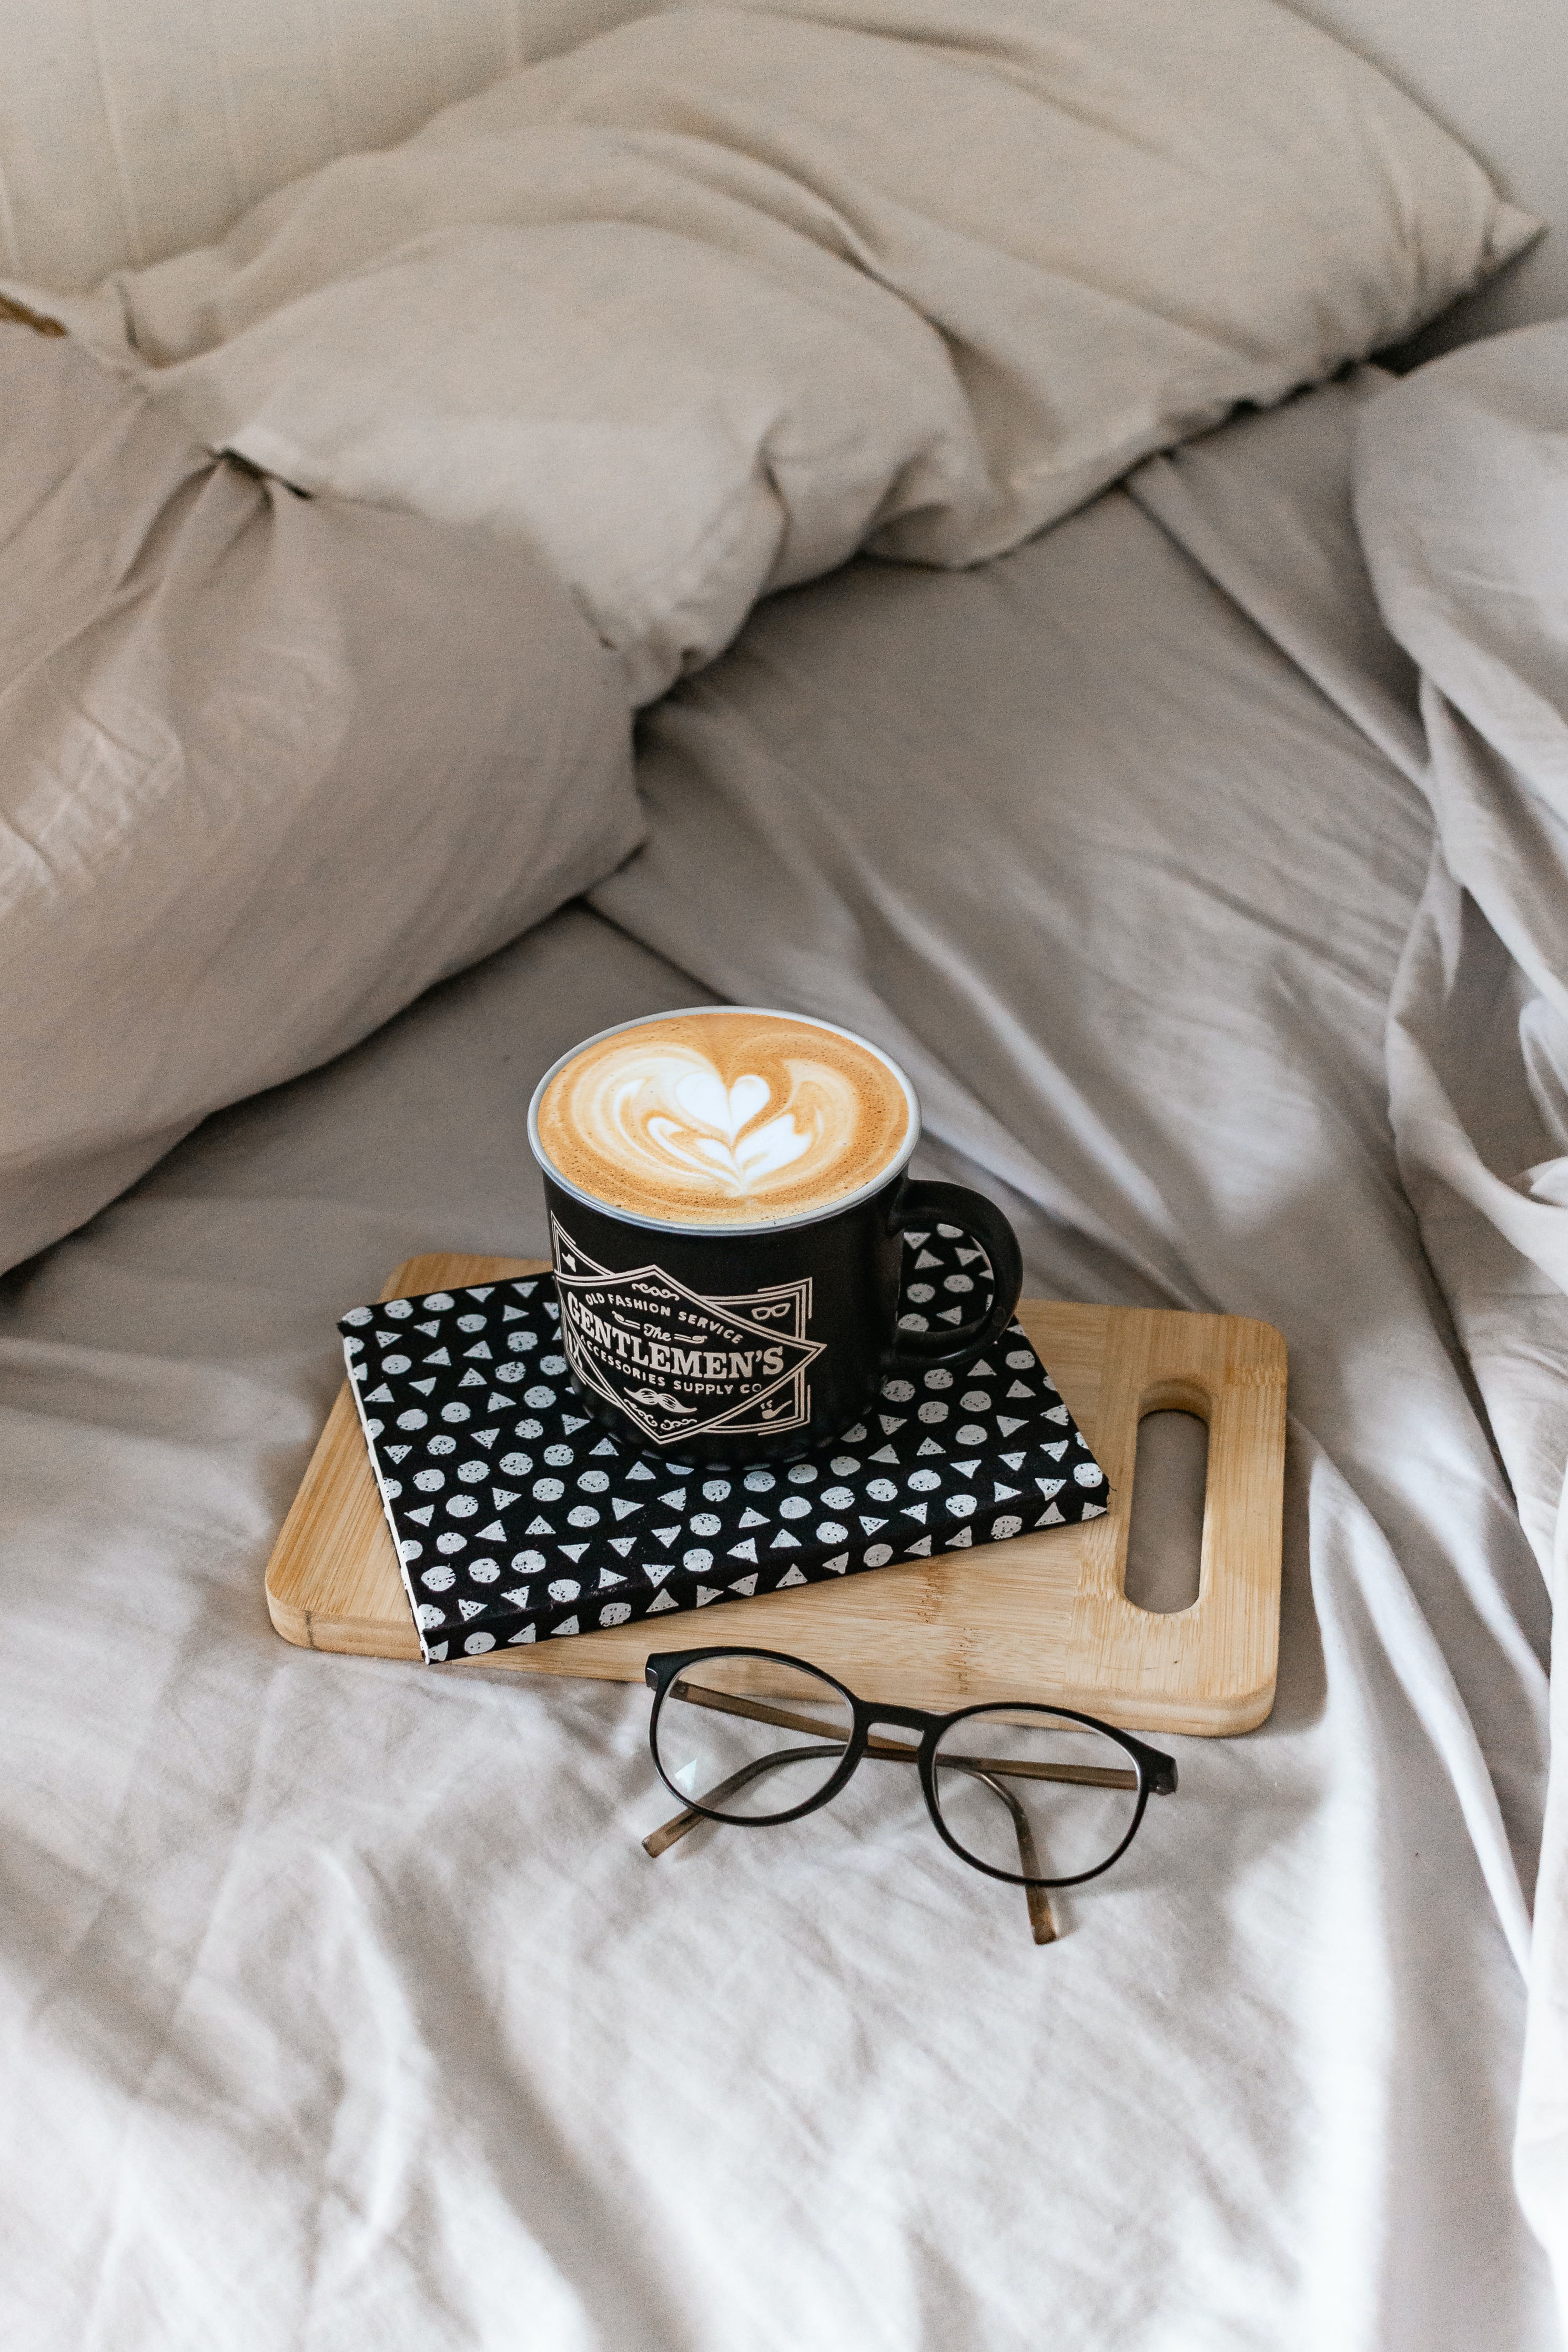 miscellanea, spectacles, cappuccino, miscellaneous, cup, book, bed, glasses 8K